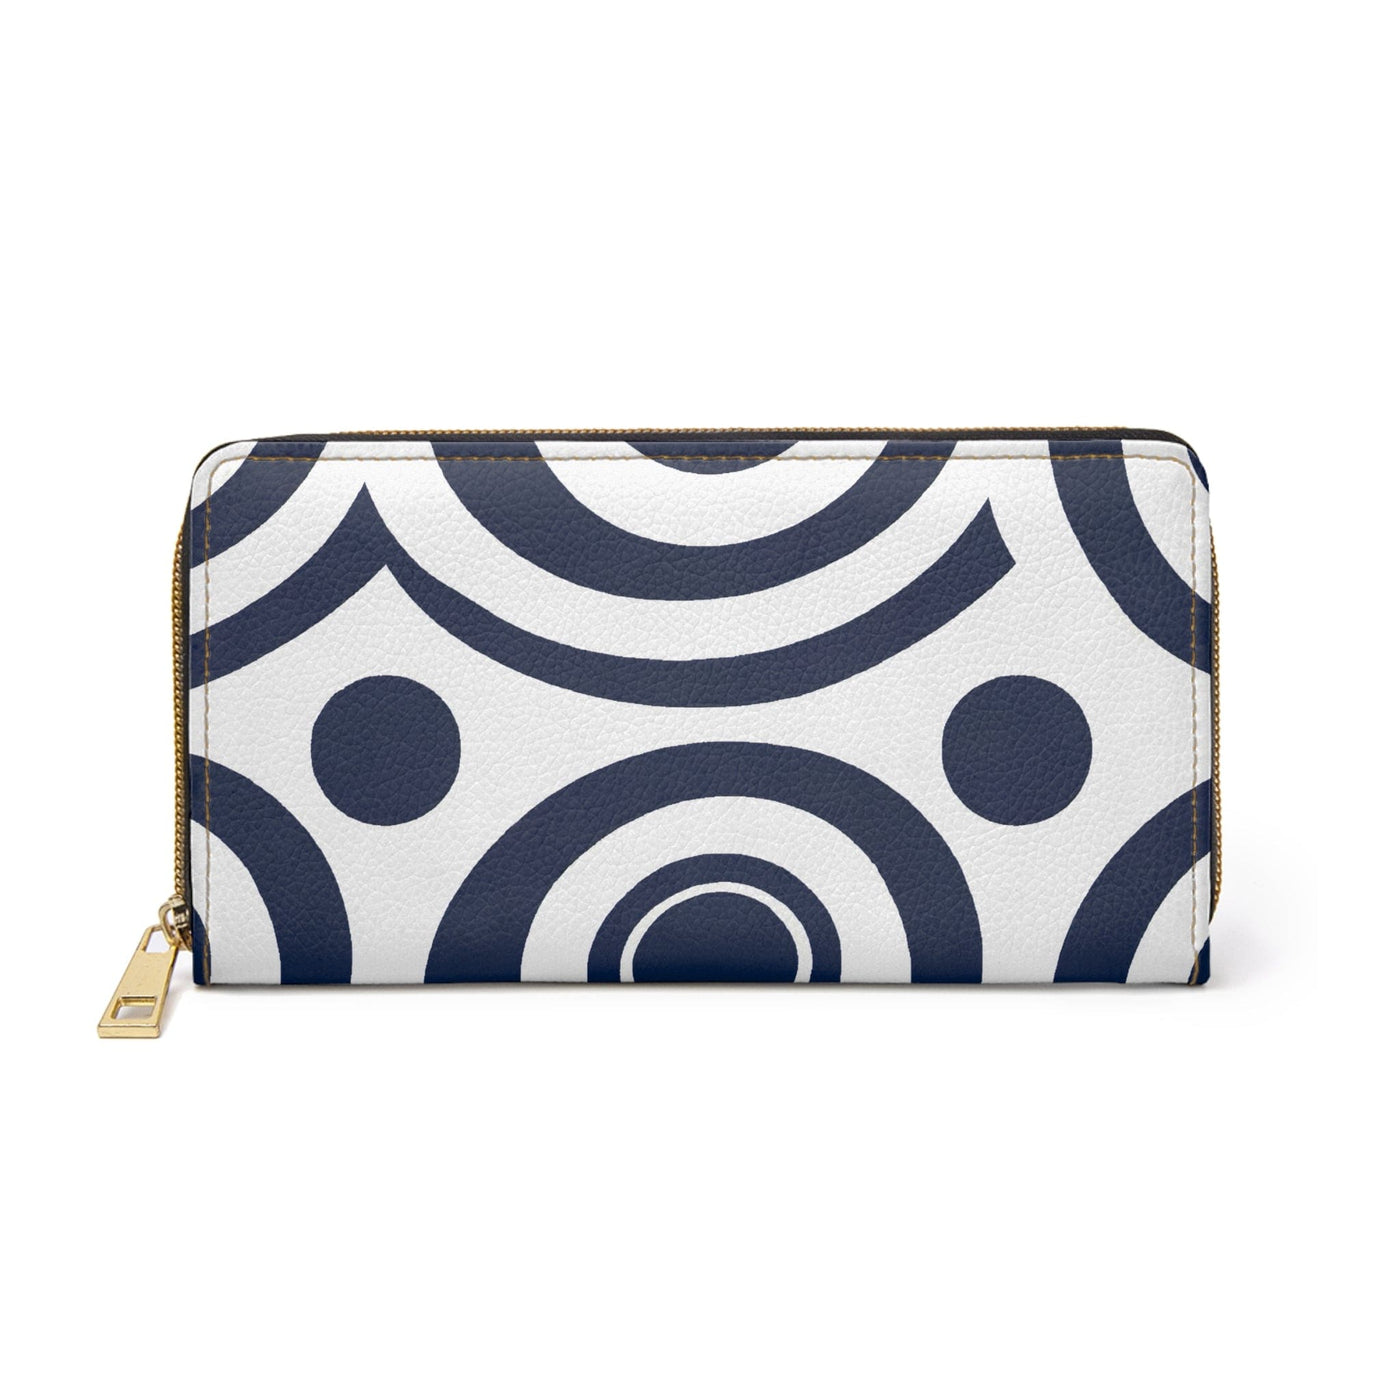 Zipper Wallet Navy Blue And White Circular Pattern - Accessories